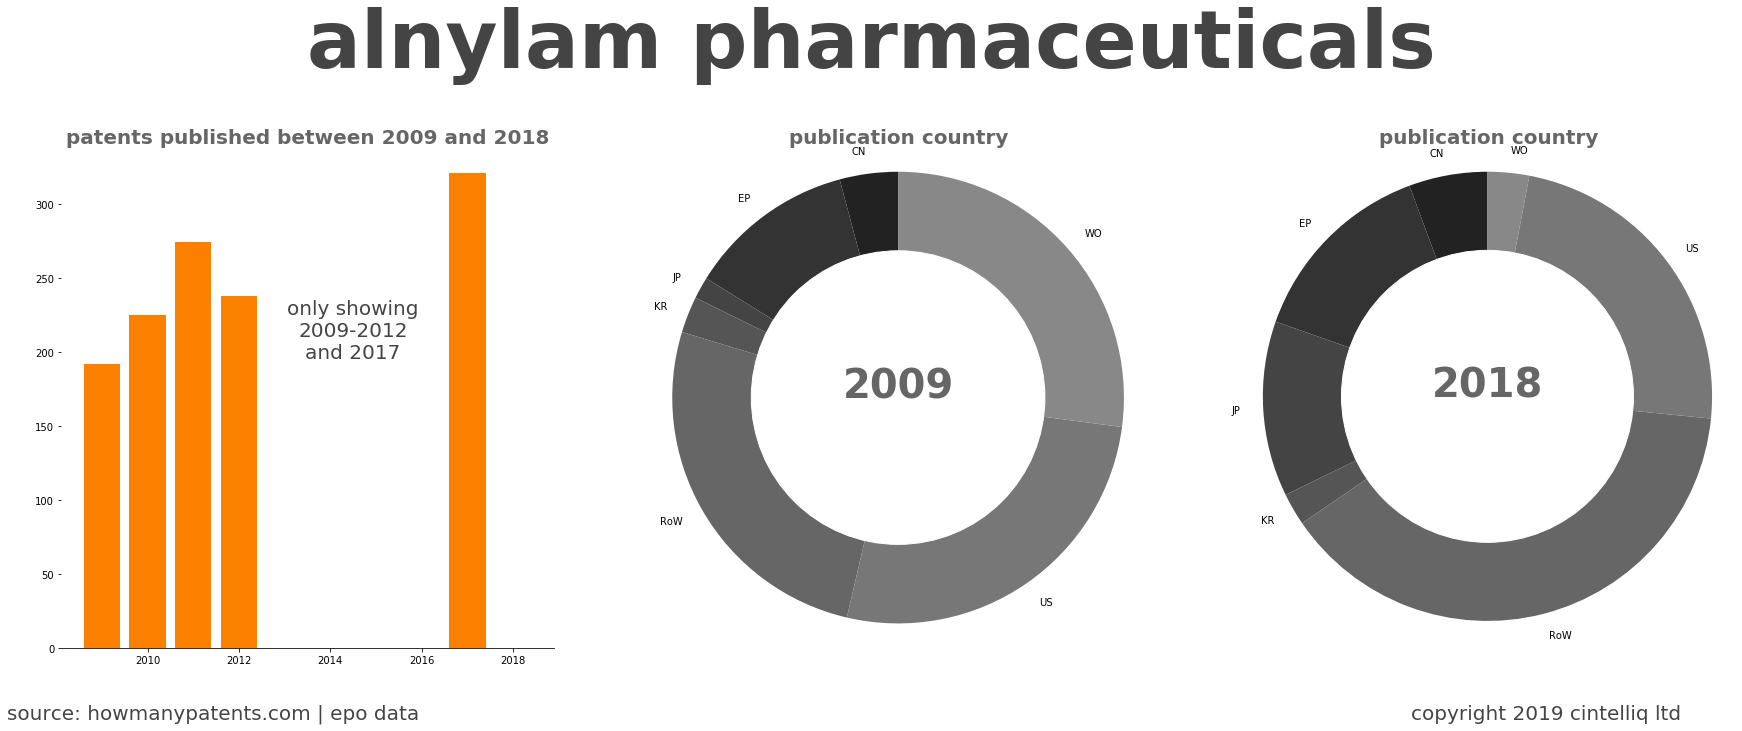 summary of patents for Alnylam Pharmaceuticals